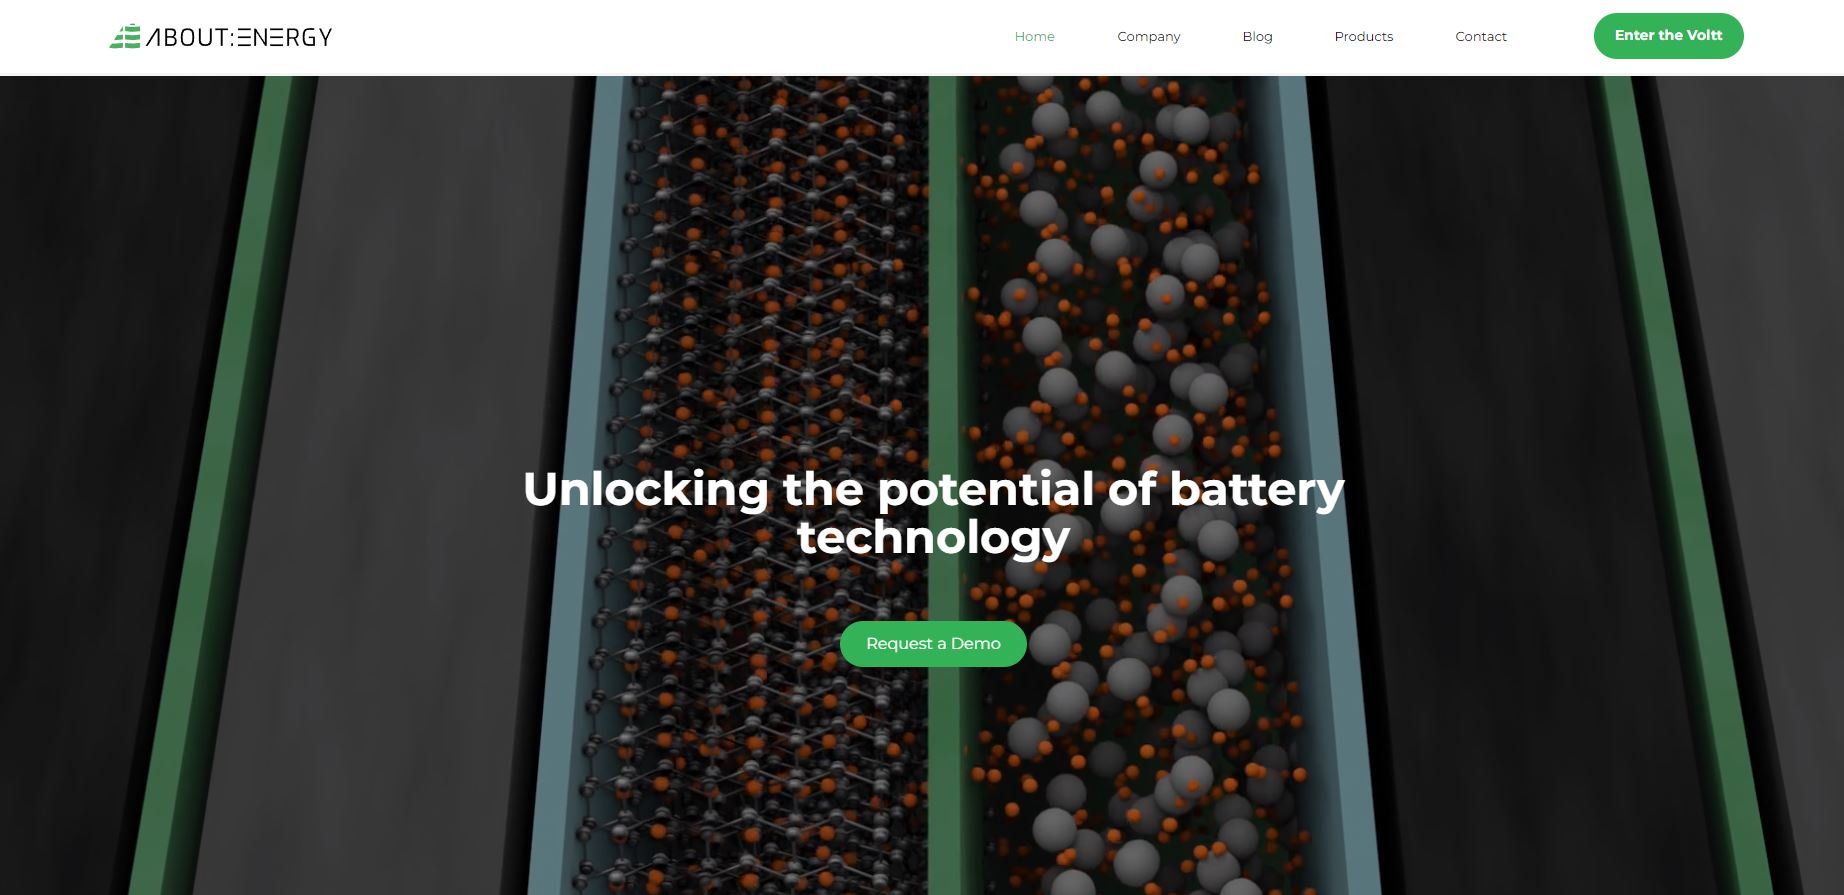 With an impressive seed funding of $1.8 million, About Energy is poised to revolutionize the field of battery technology.